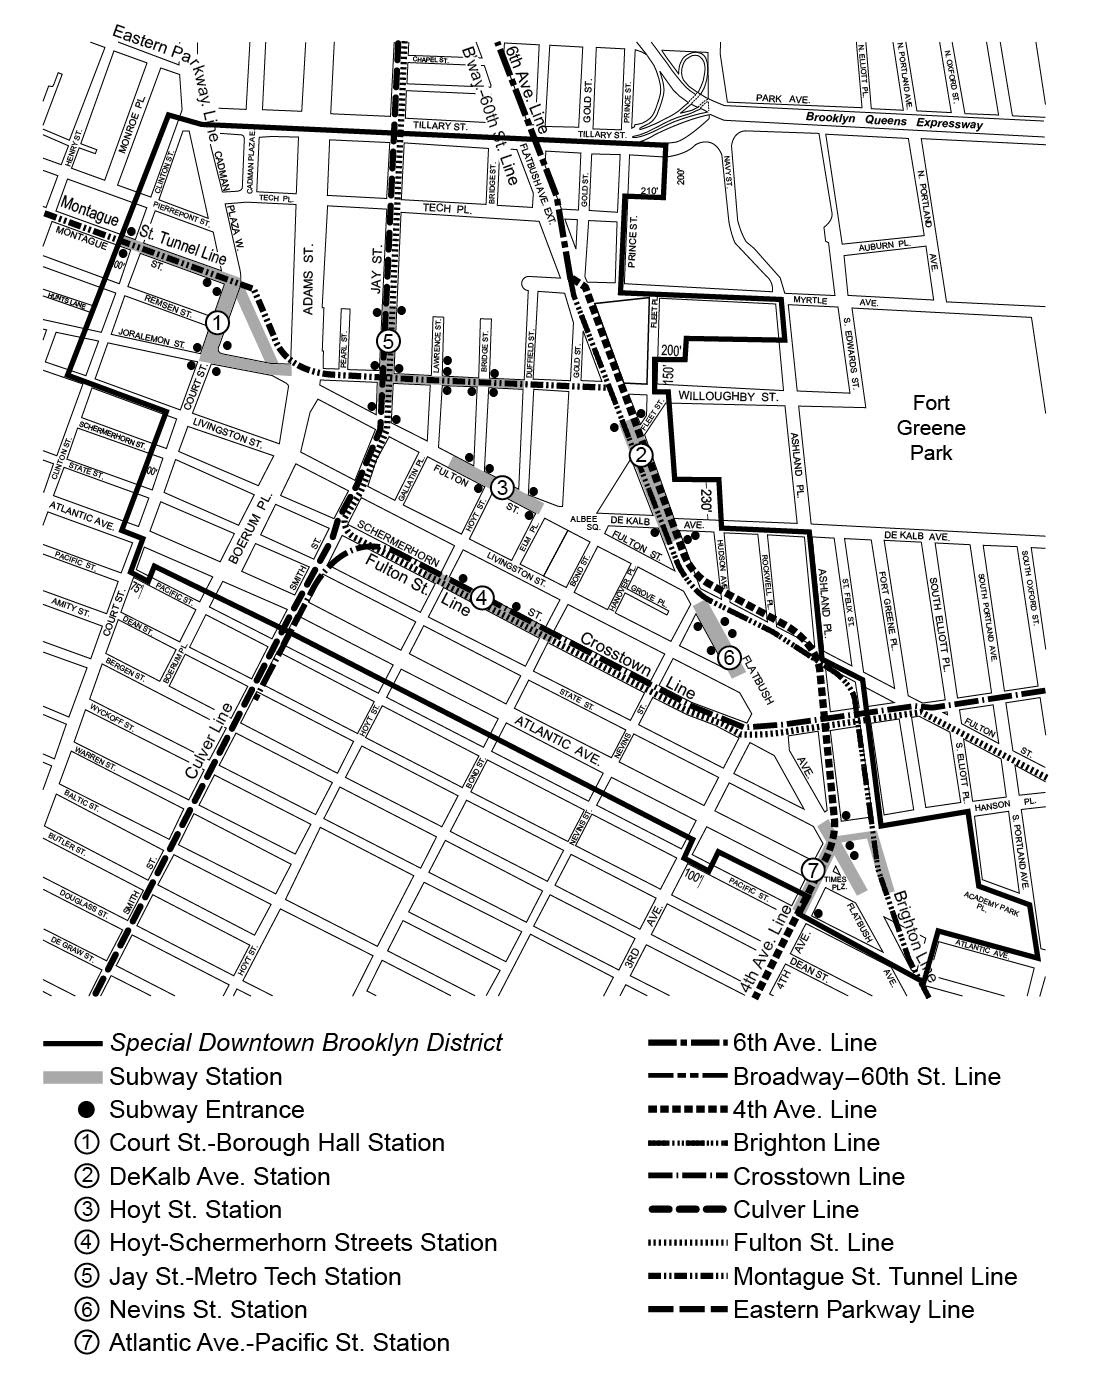 Zoning Resolutions Chapter 1: Special Downtown Brooklyn District Appendix E.6